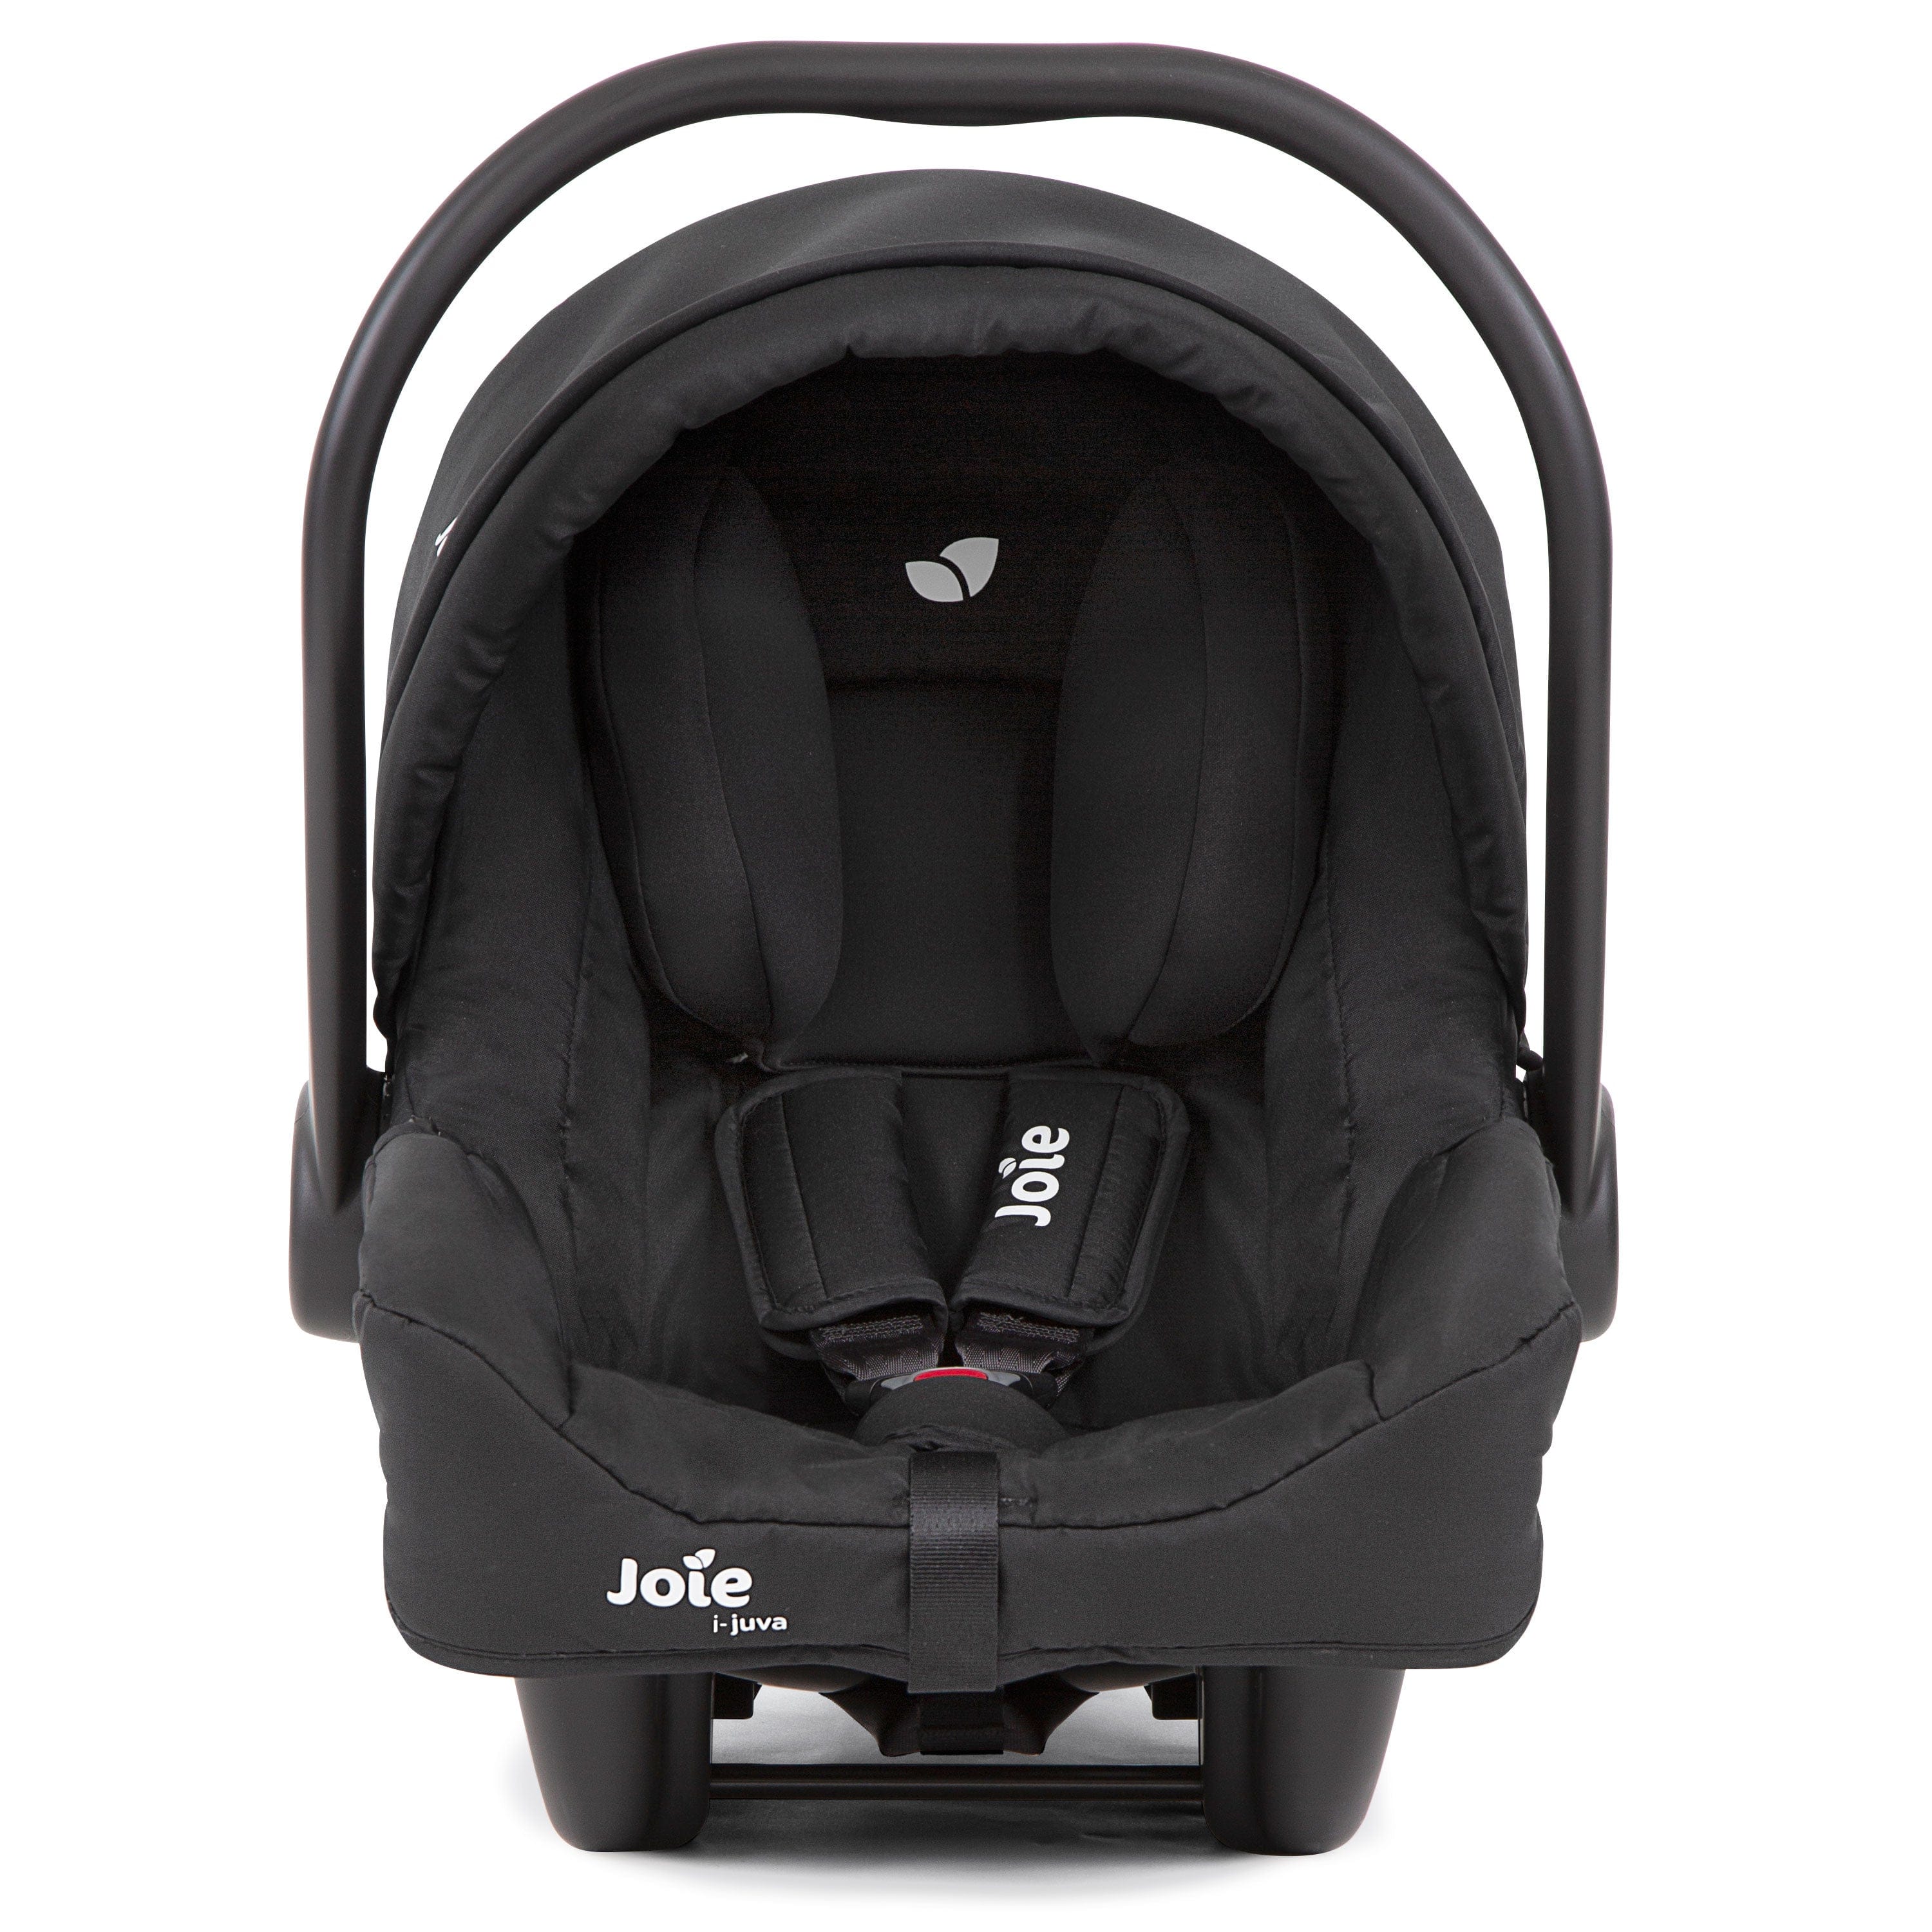 Joie i-Juva R129 i-Size Infant Carrier in Shale Baby Carriers C2114AASHA000 5056080612638